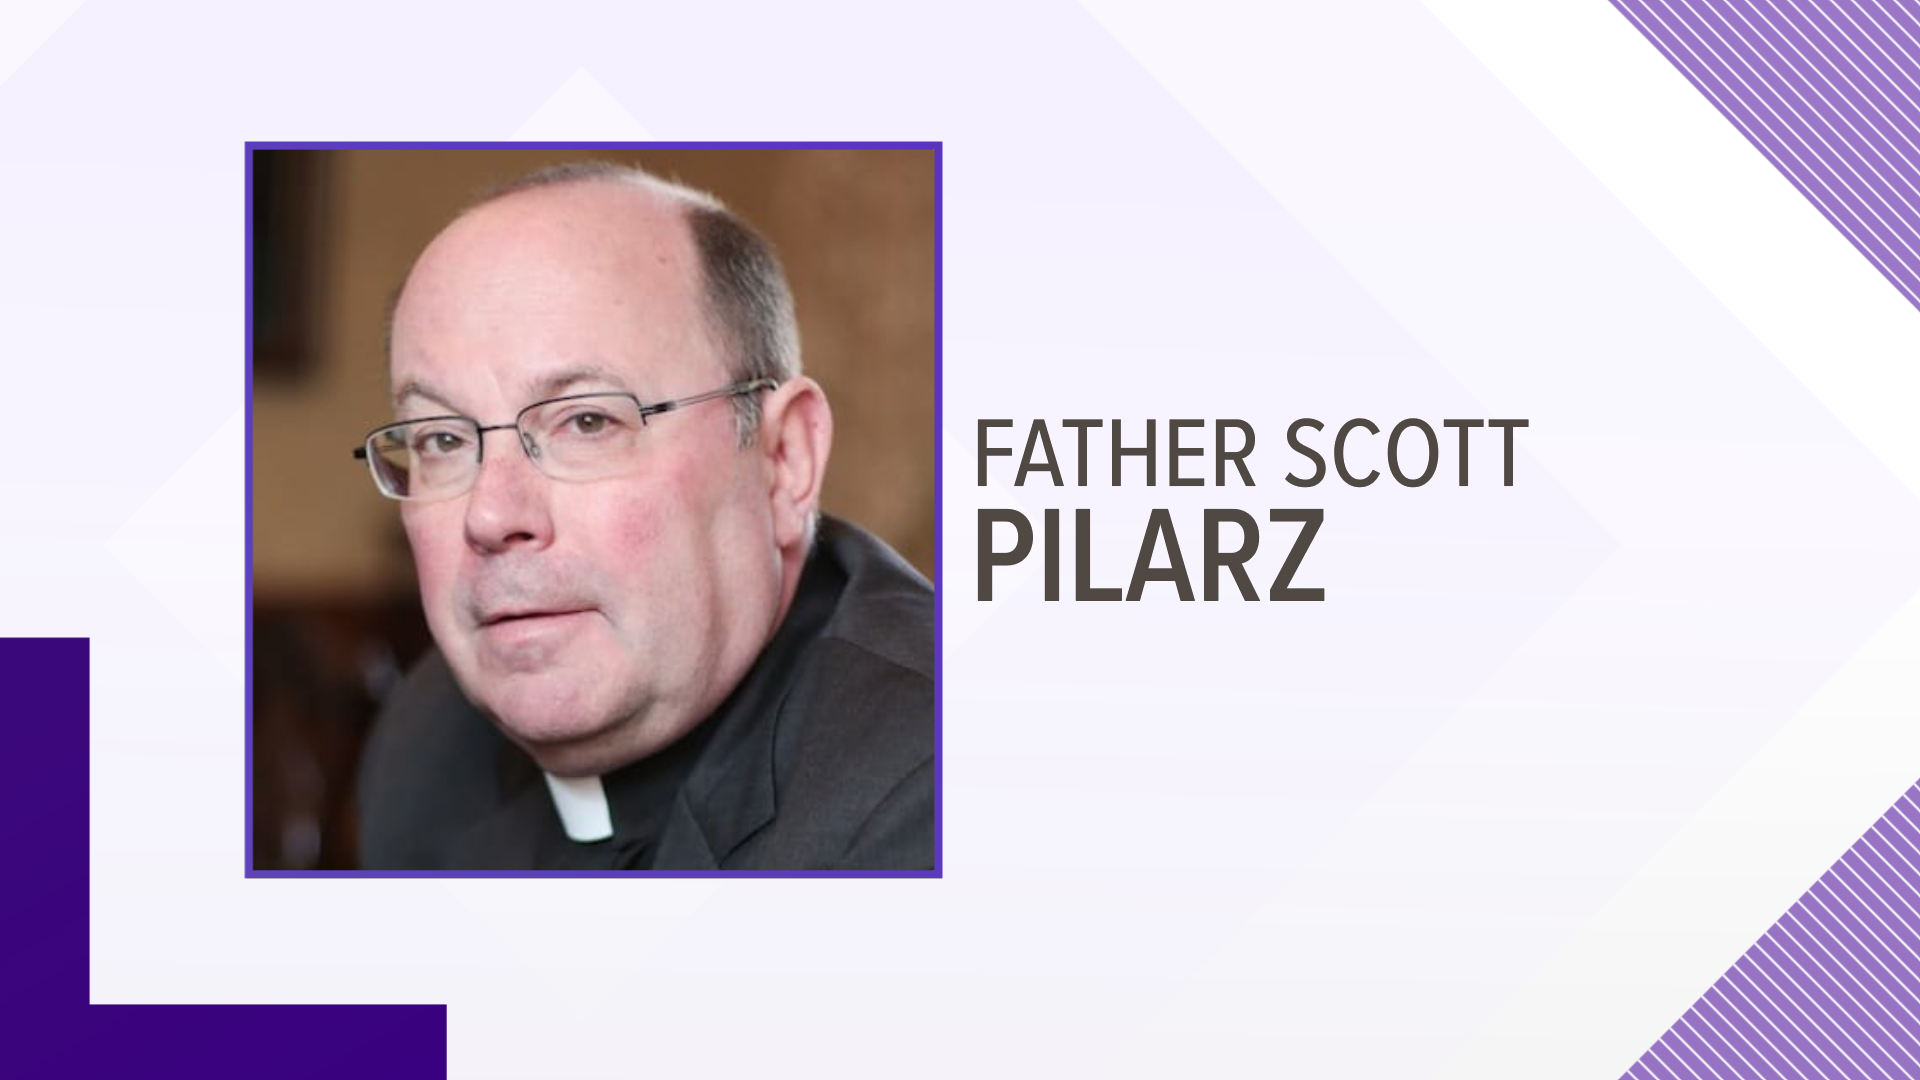 The University of Scranton community paid its respects on Friday to Fr. Pilarz, the university's 24th and 27th president, who passed away earlier this week.